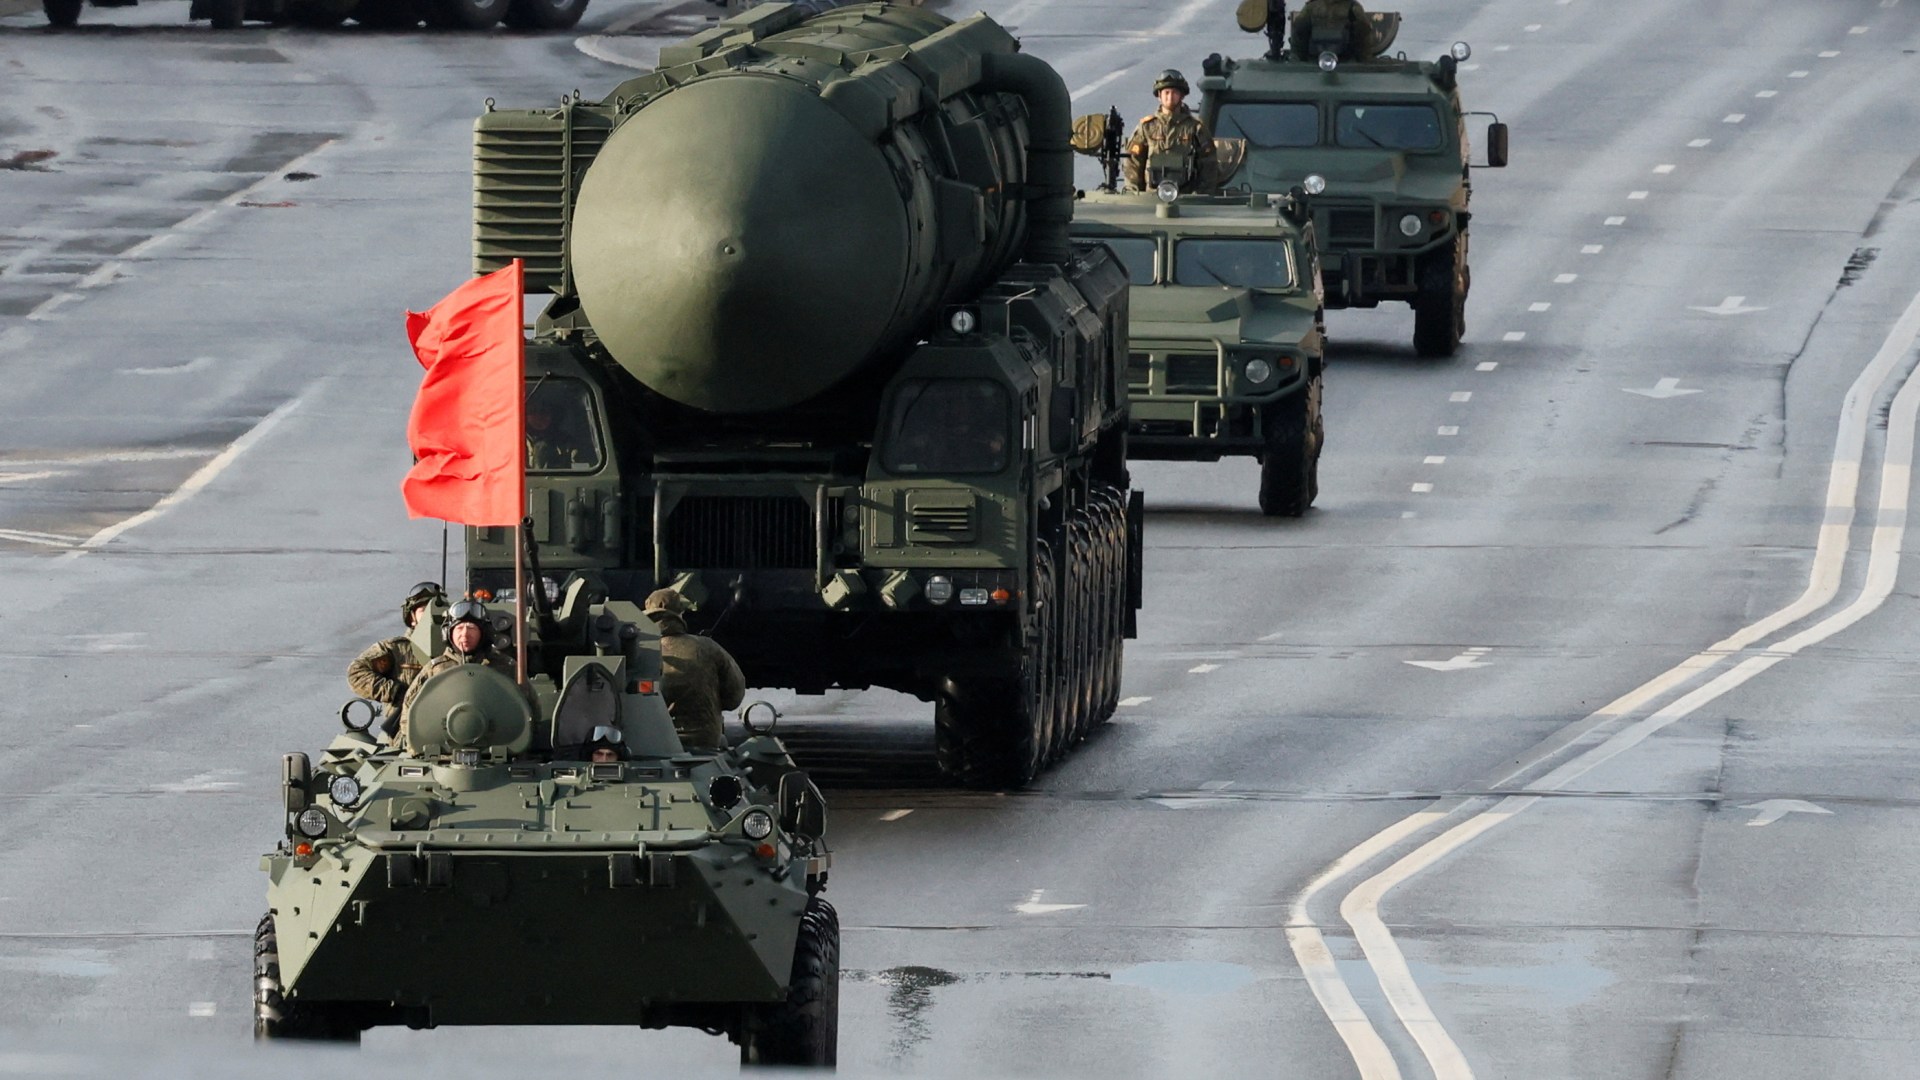 Putin parades Yars nuclear missile launchers, tanks & gun-touting soldiers ahead of annual Victory Day... - The US Sun